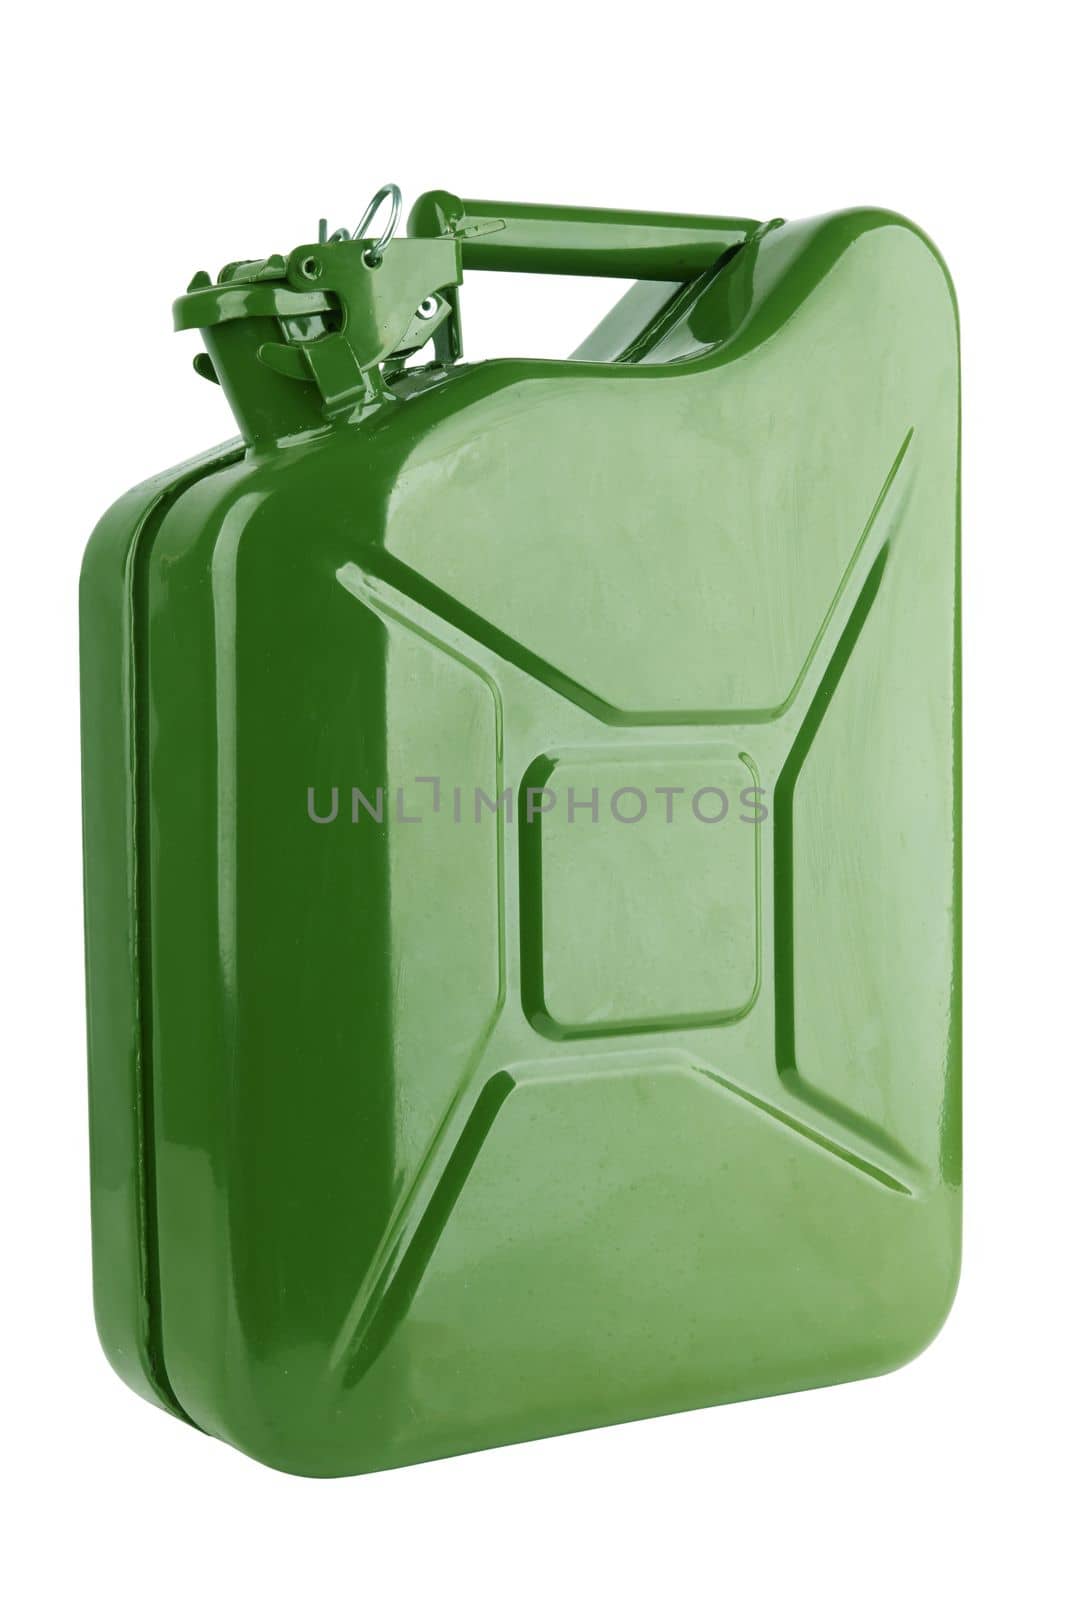 Green metal canister by pioneer111